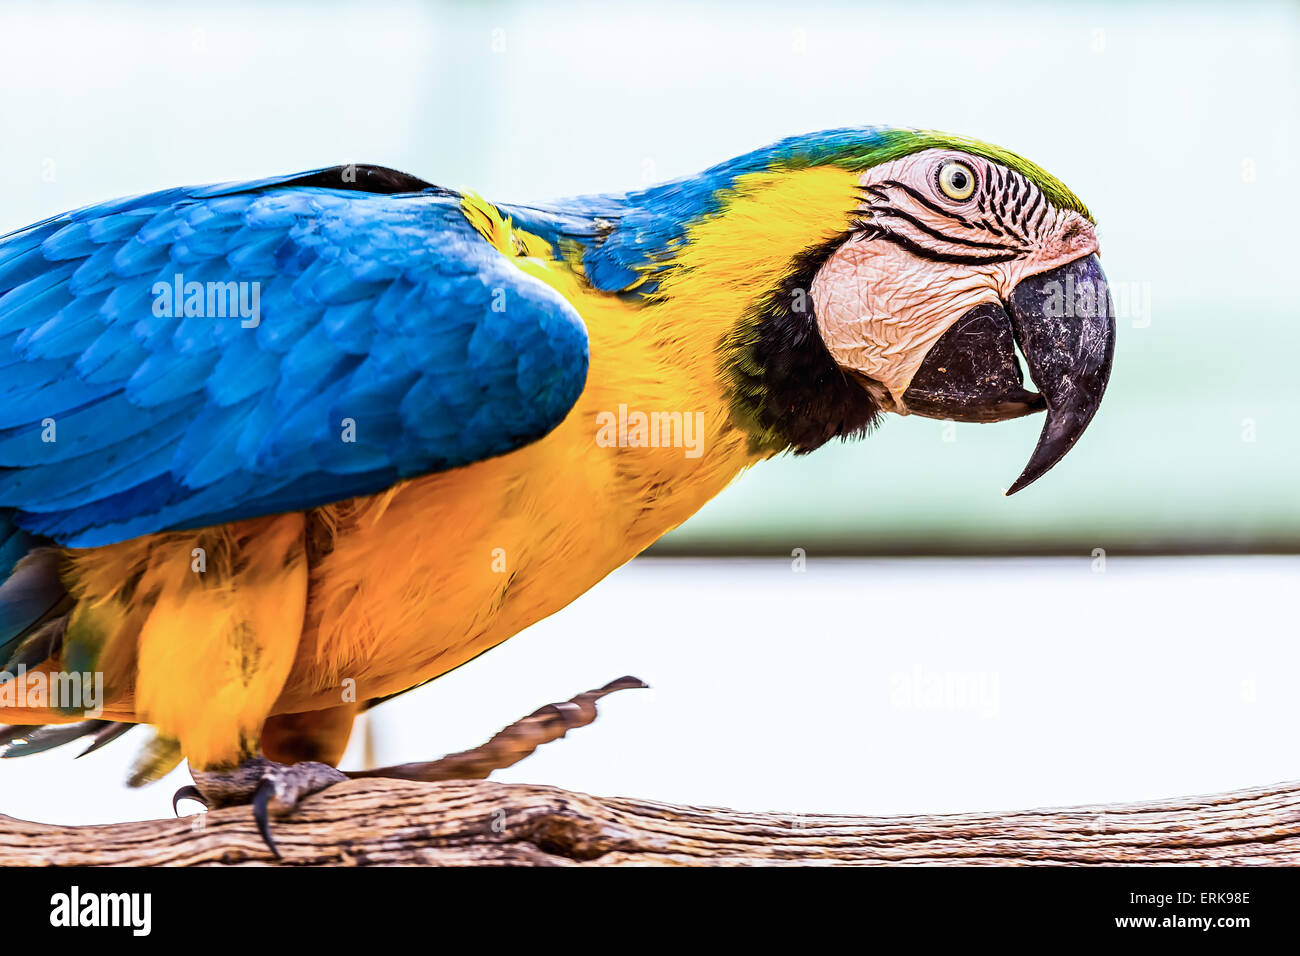 Blue and Gold or yellow Macaw parrot siting on wooden perch in zoo Stock Photo